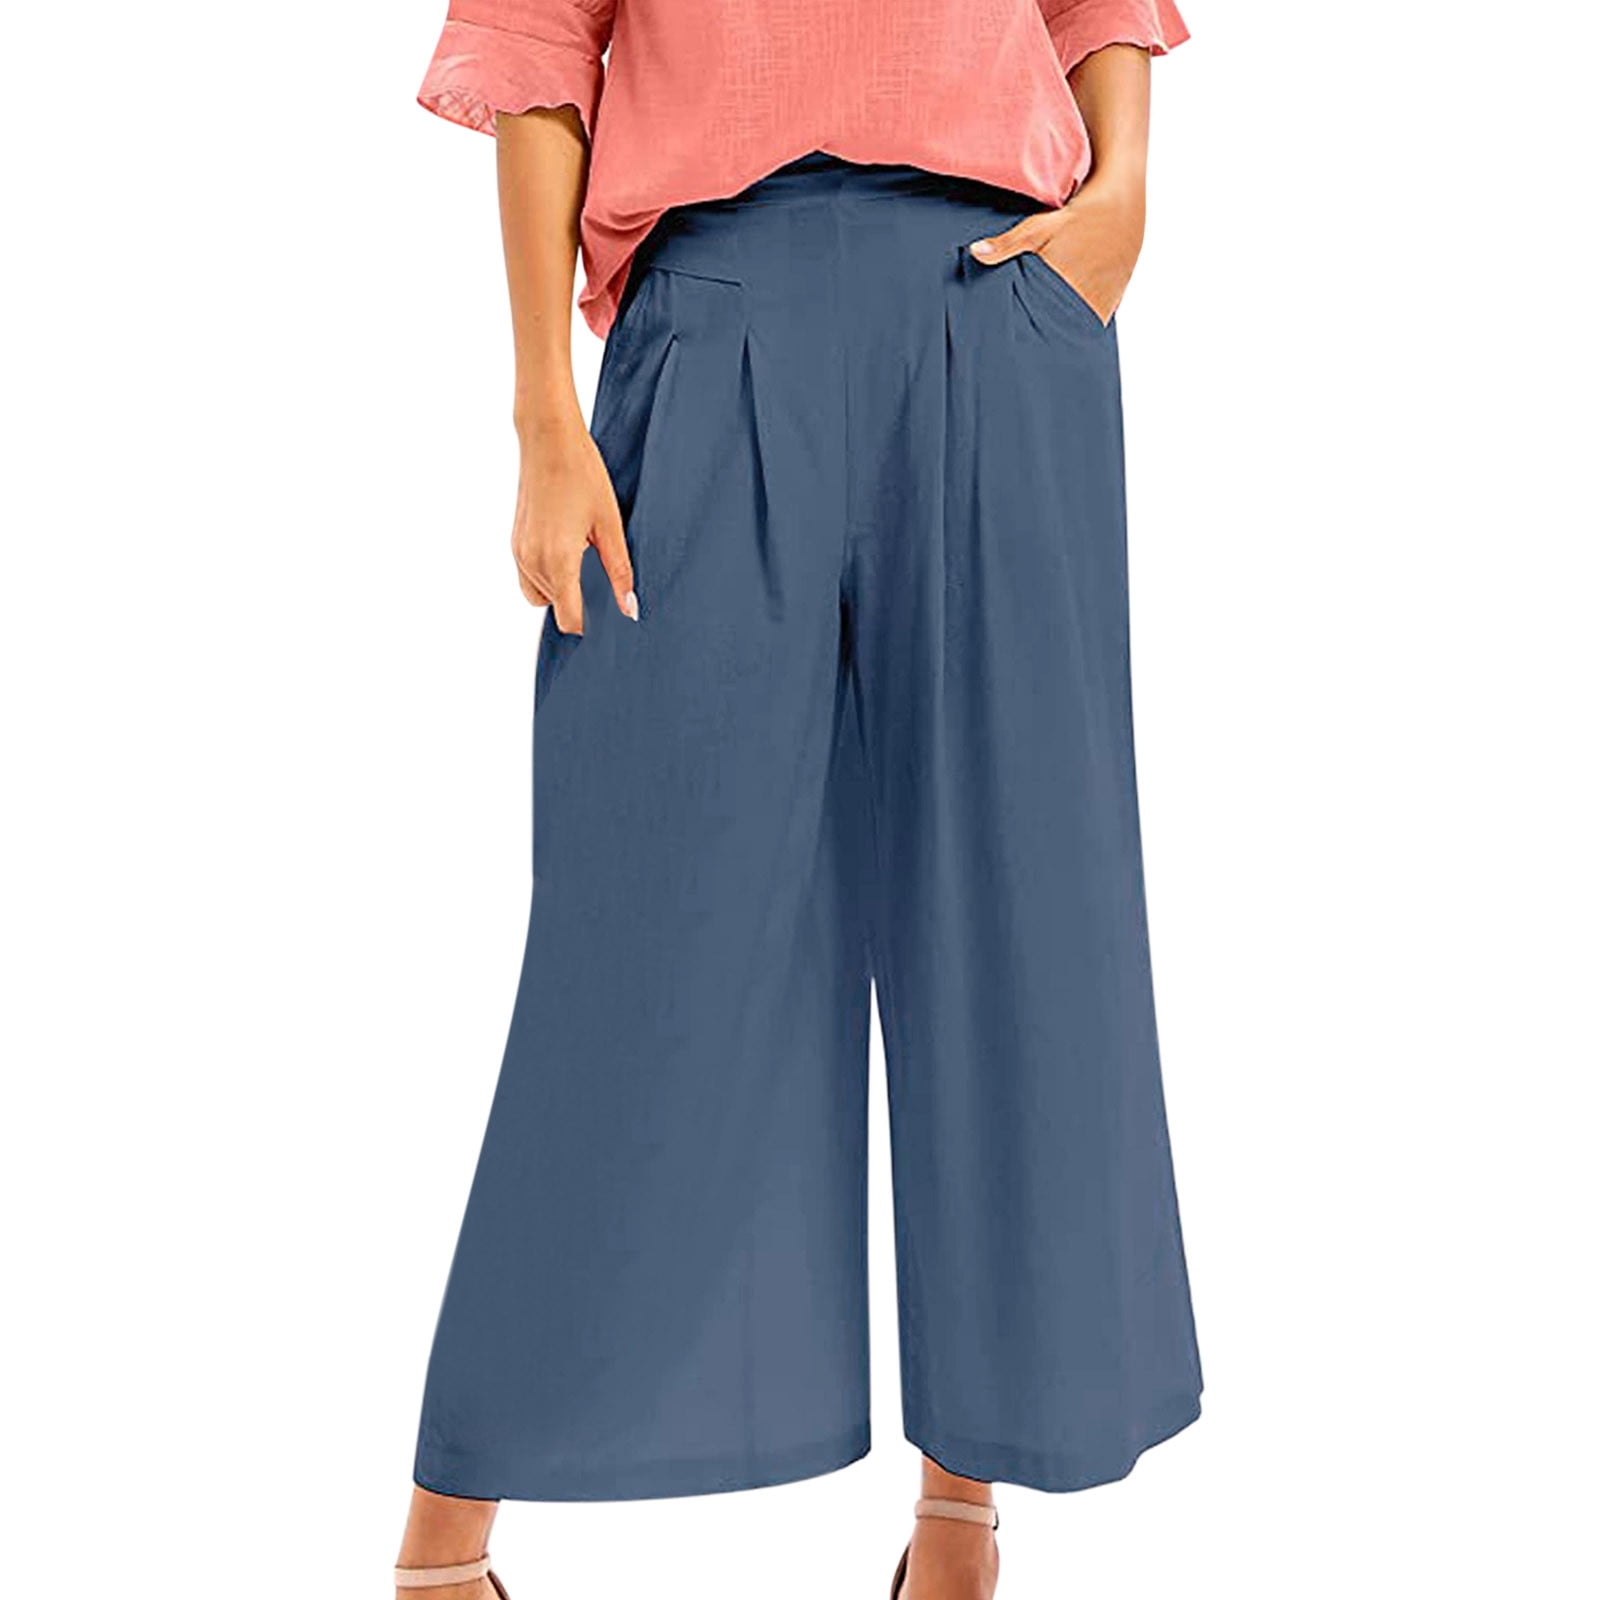 Womens High Waist Wool Skirt Culottes Pants For Autumn And Winter  Versatile, Pleated, And Casual Straight Style From Crosslery, $18.57 |  DHgate.Com